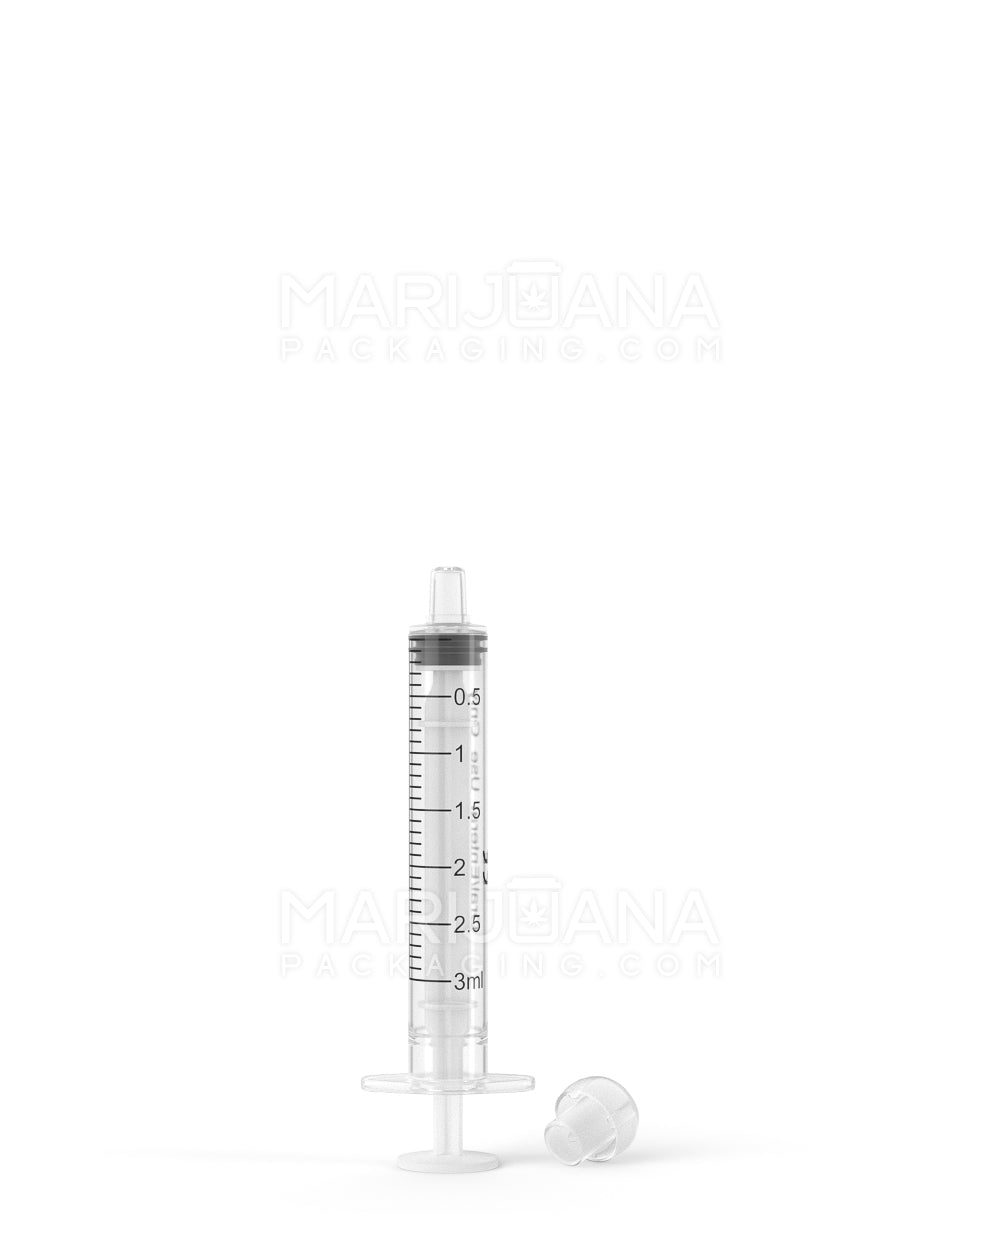 Plastic Oral Concentrate Syringes | 3mL - 0.5mL Increments | Sample - 9